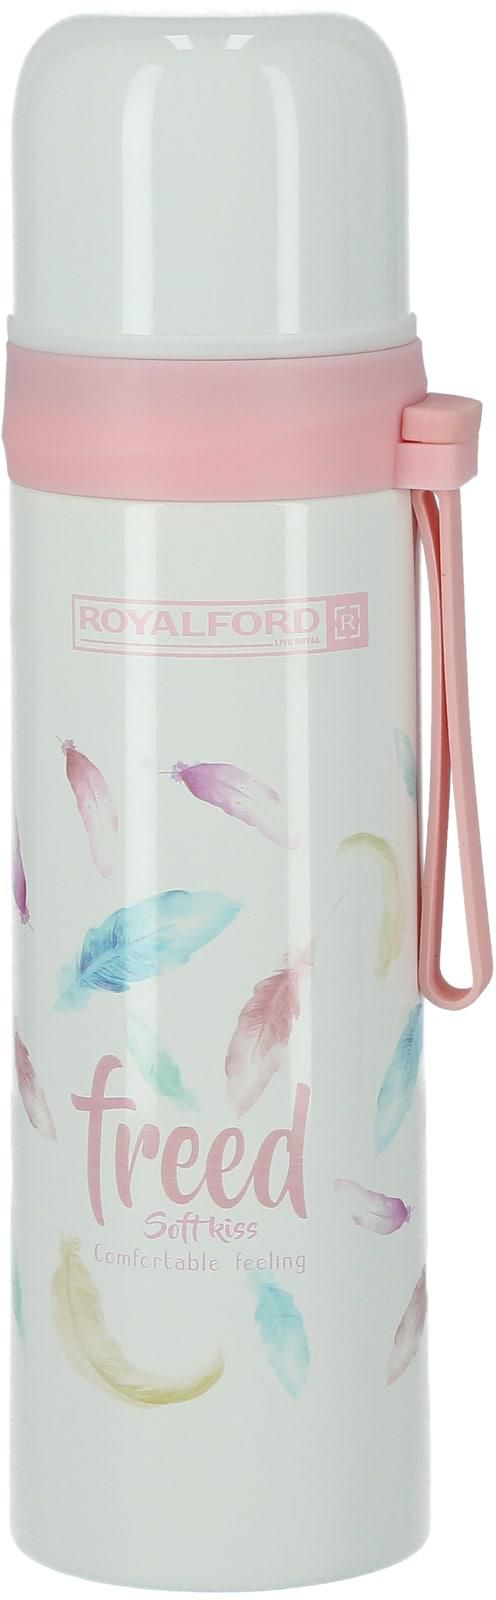 Royalford 500ml Stainless Steel Vacuum Bottle - Stainless Steel Flask &amp; Water Bottle - Hot &amp; Cold Leak-Resistant Sports Drink Bottle - Vacuum Insulation Bottle For Indoor Outdoor Use